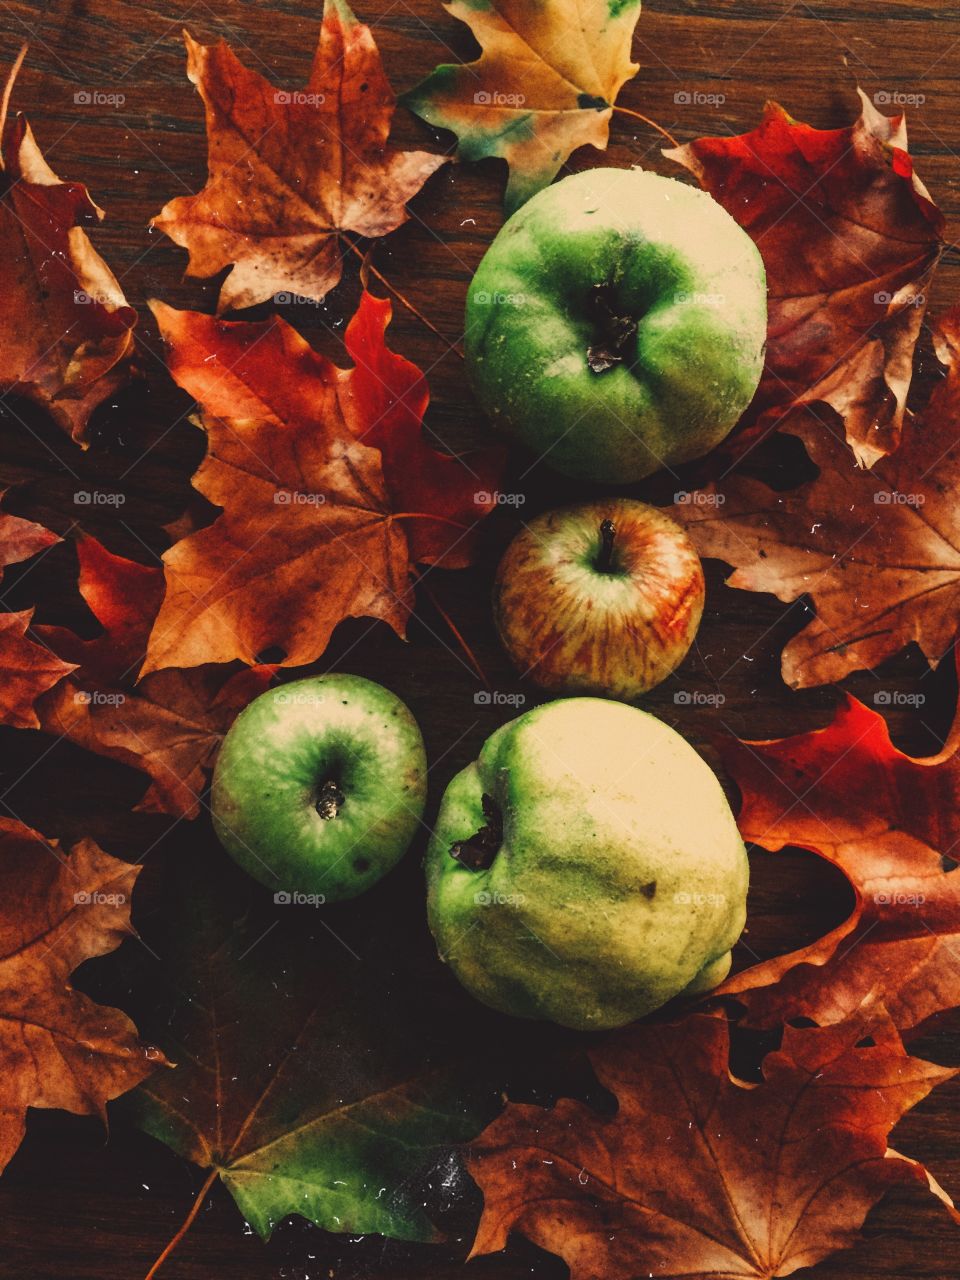 Apples and fall